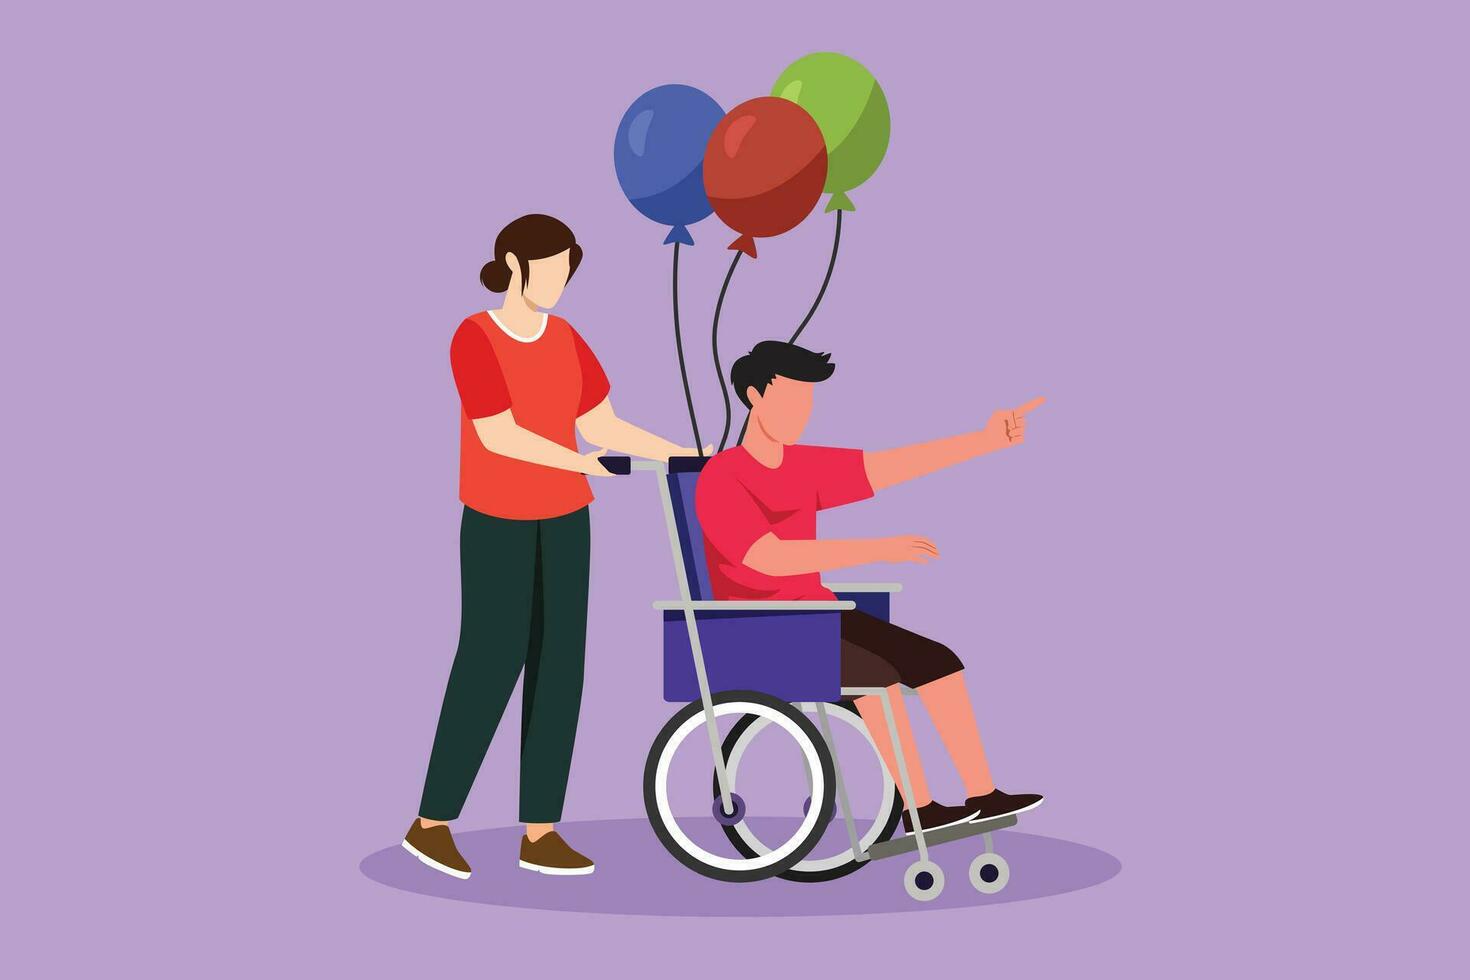 Cartoon flat style drawing disability people scene concept. Woman carries disabled man in wheelchair. Accessibility rehabilitation invalid person, people activities. Graphic design vector illustration